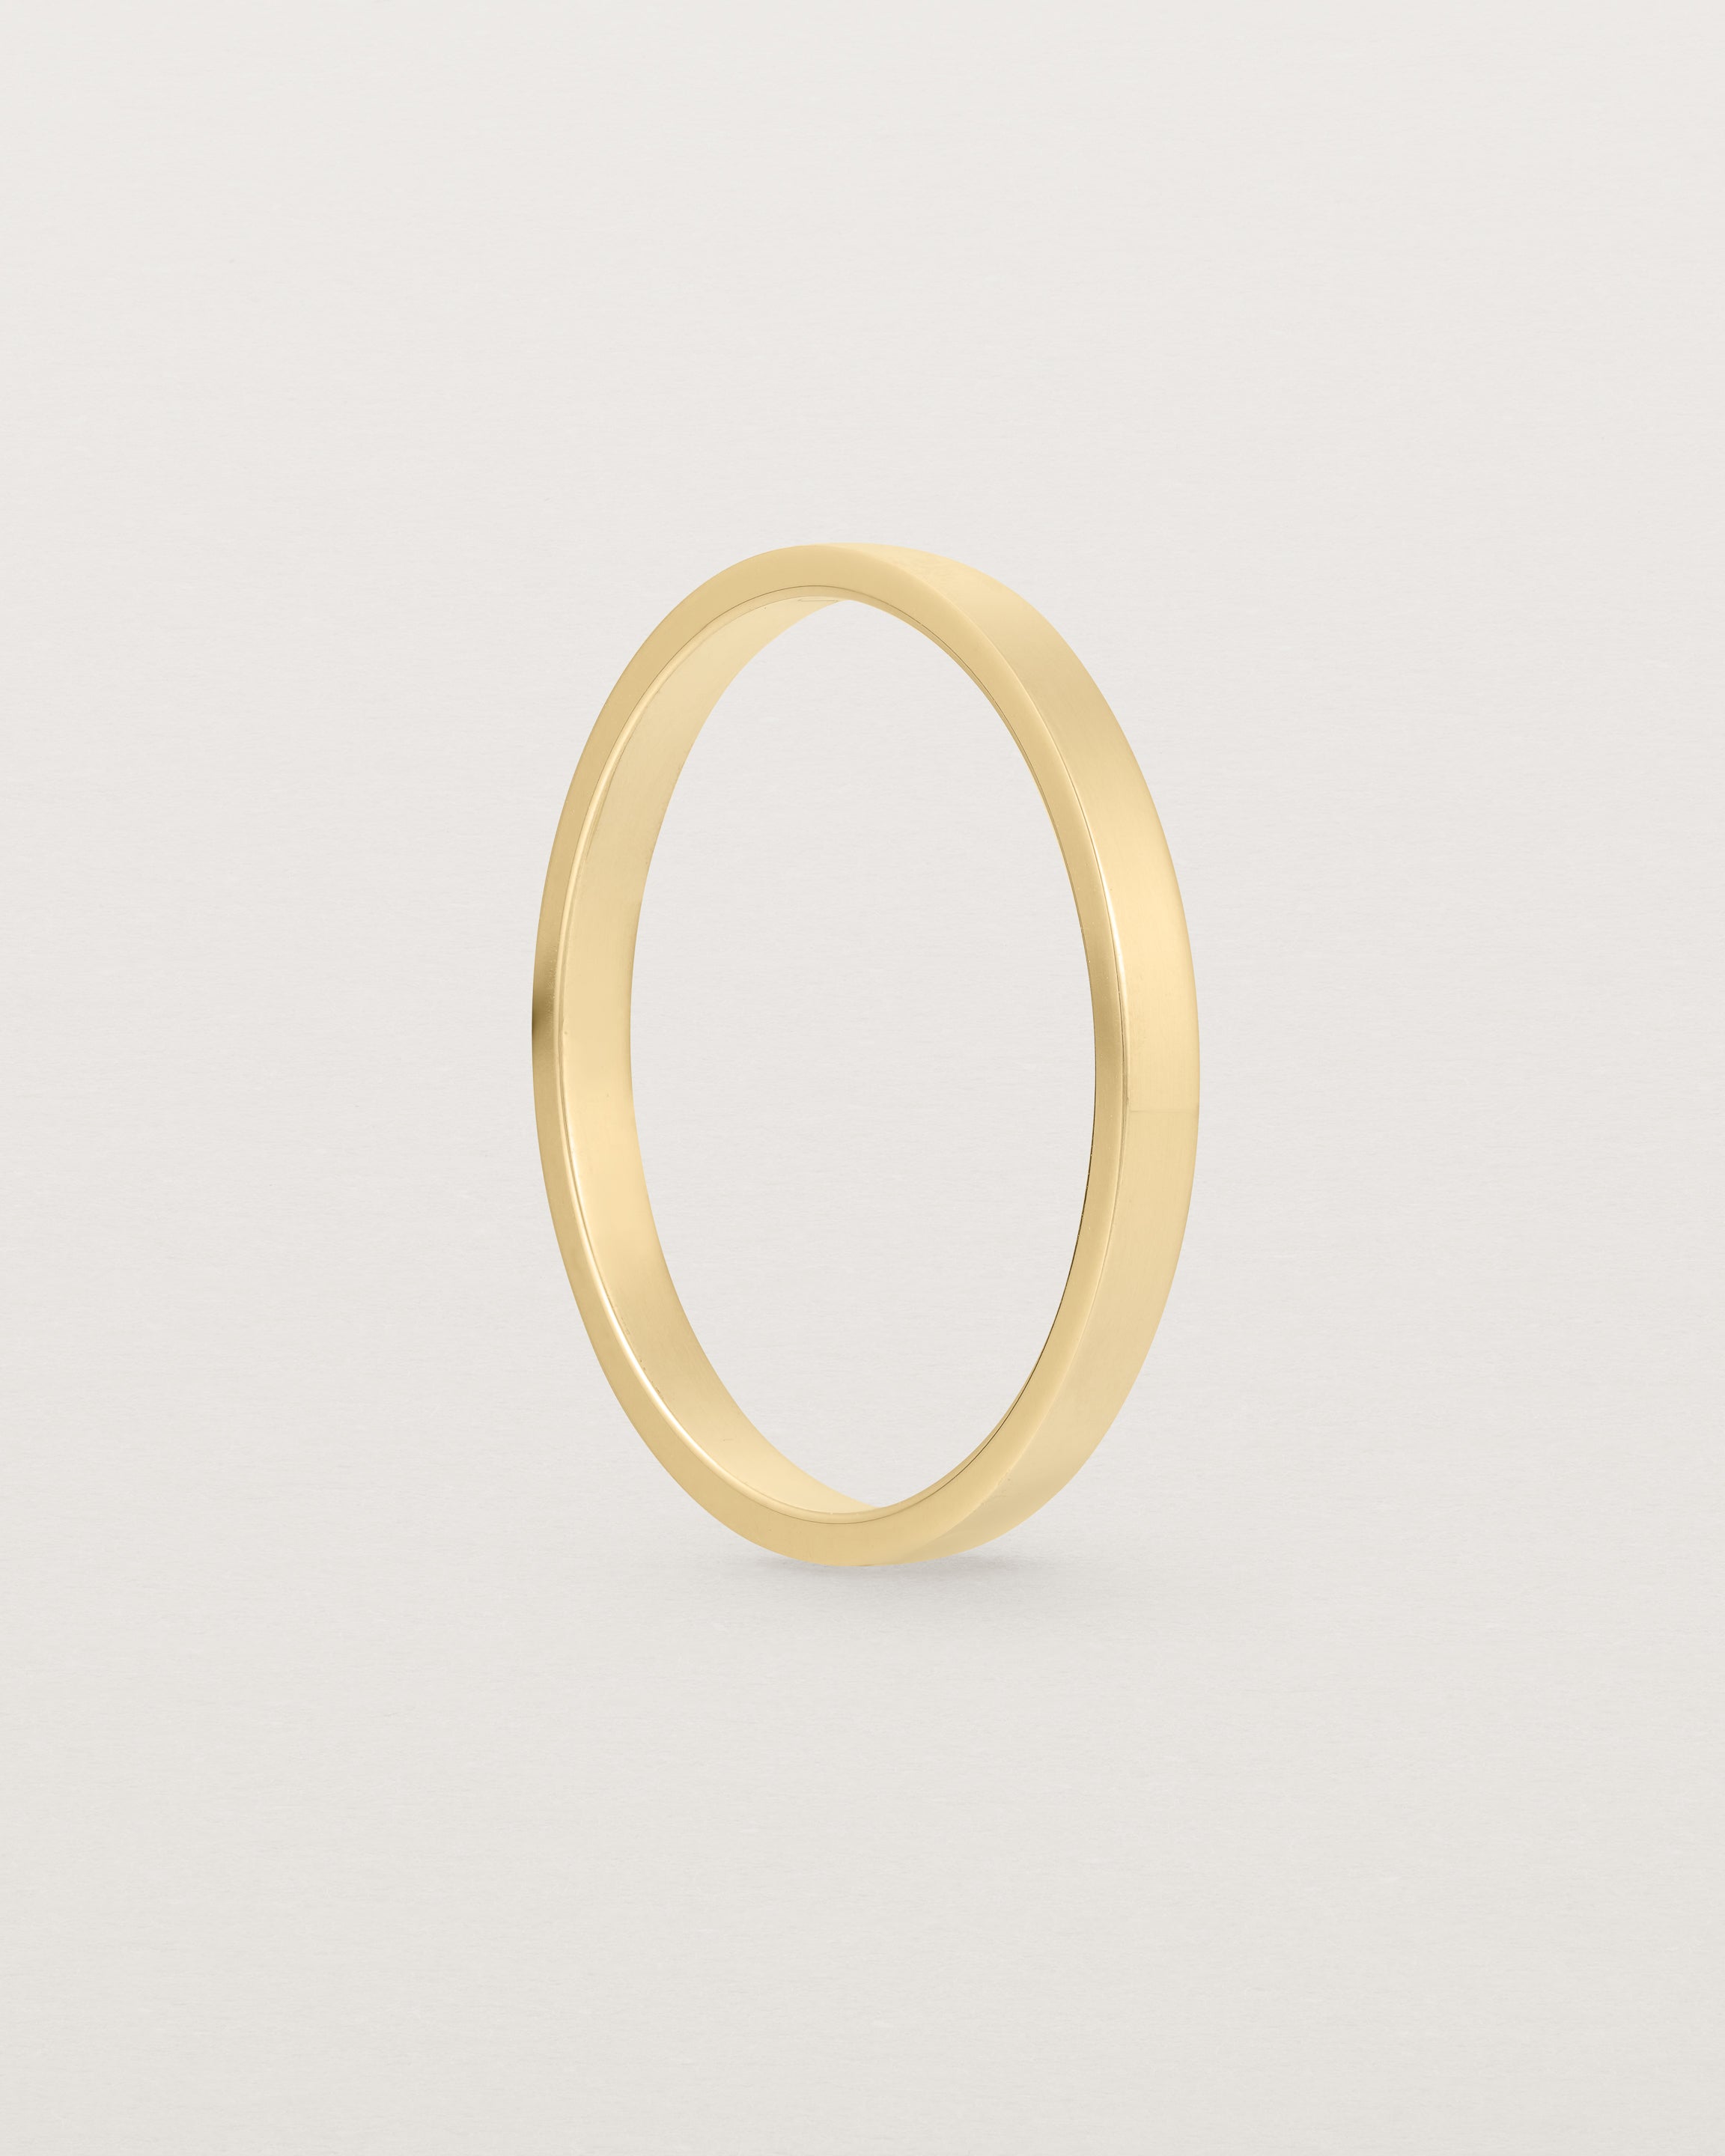 The side profile of our square profile, flat wedding band crafted in yellow gold